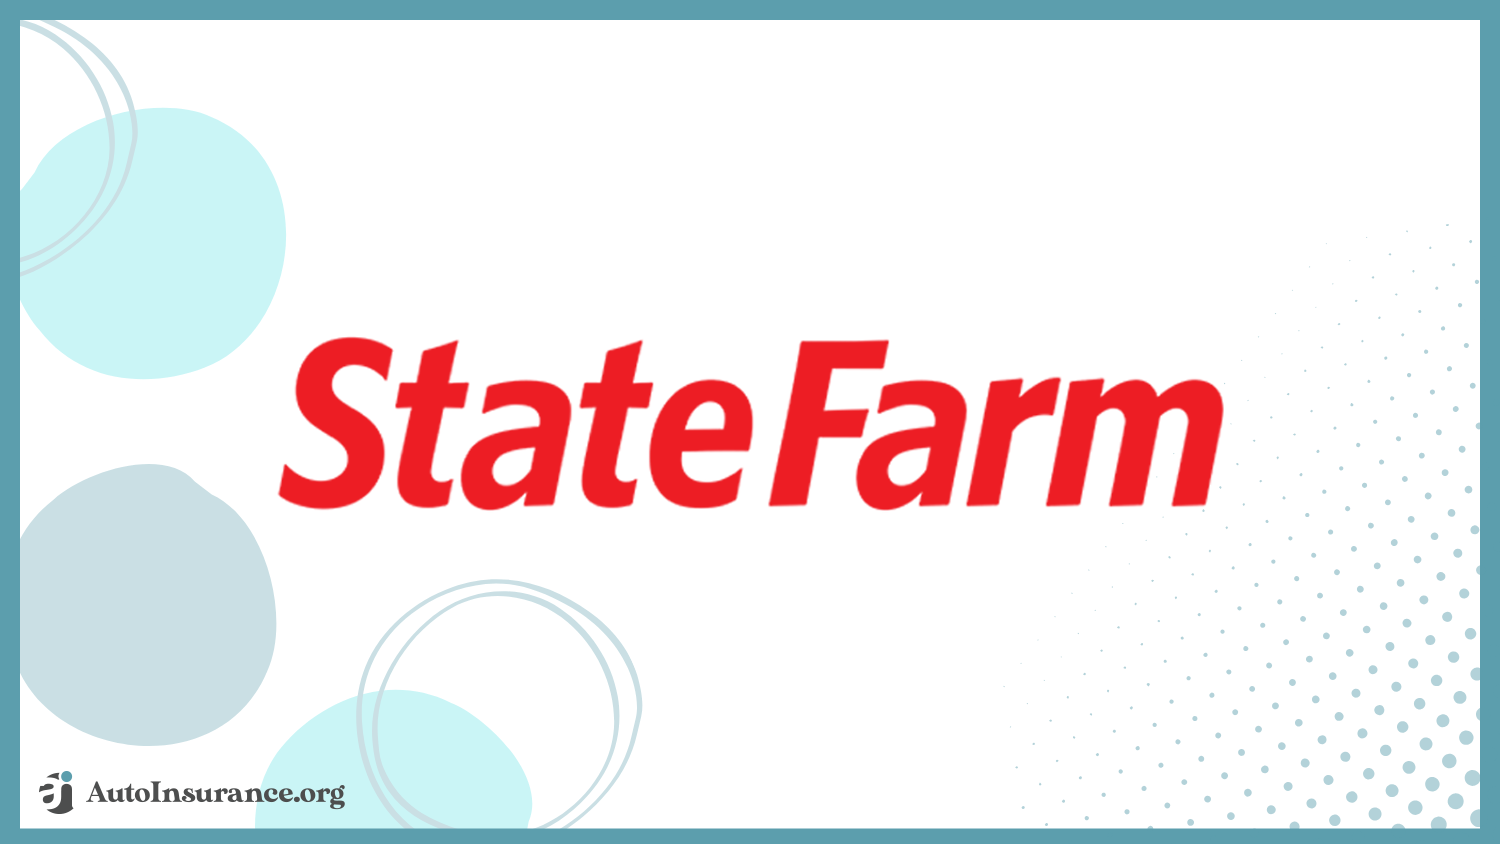 State Farm: Best Auto Insurance for Clergy